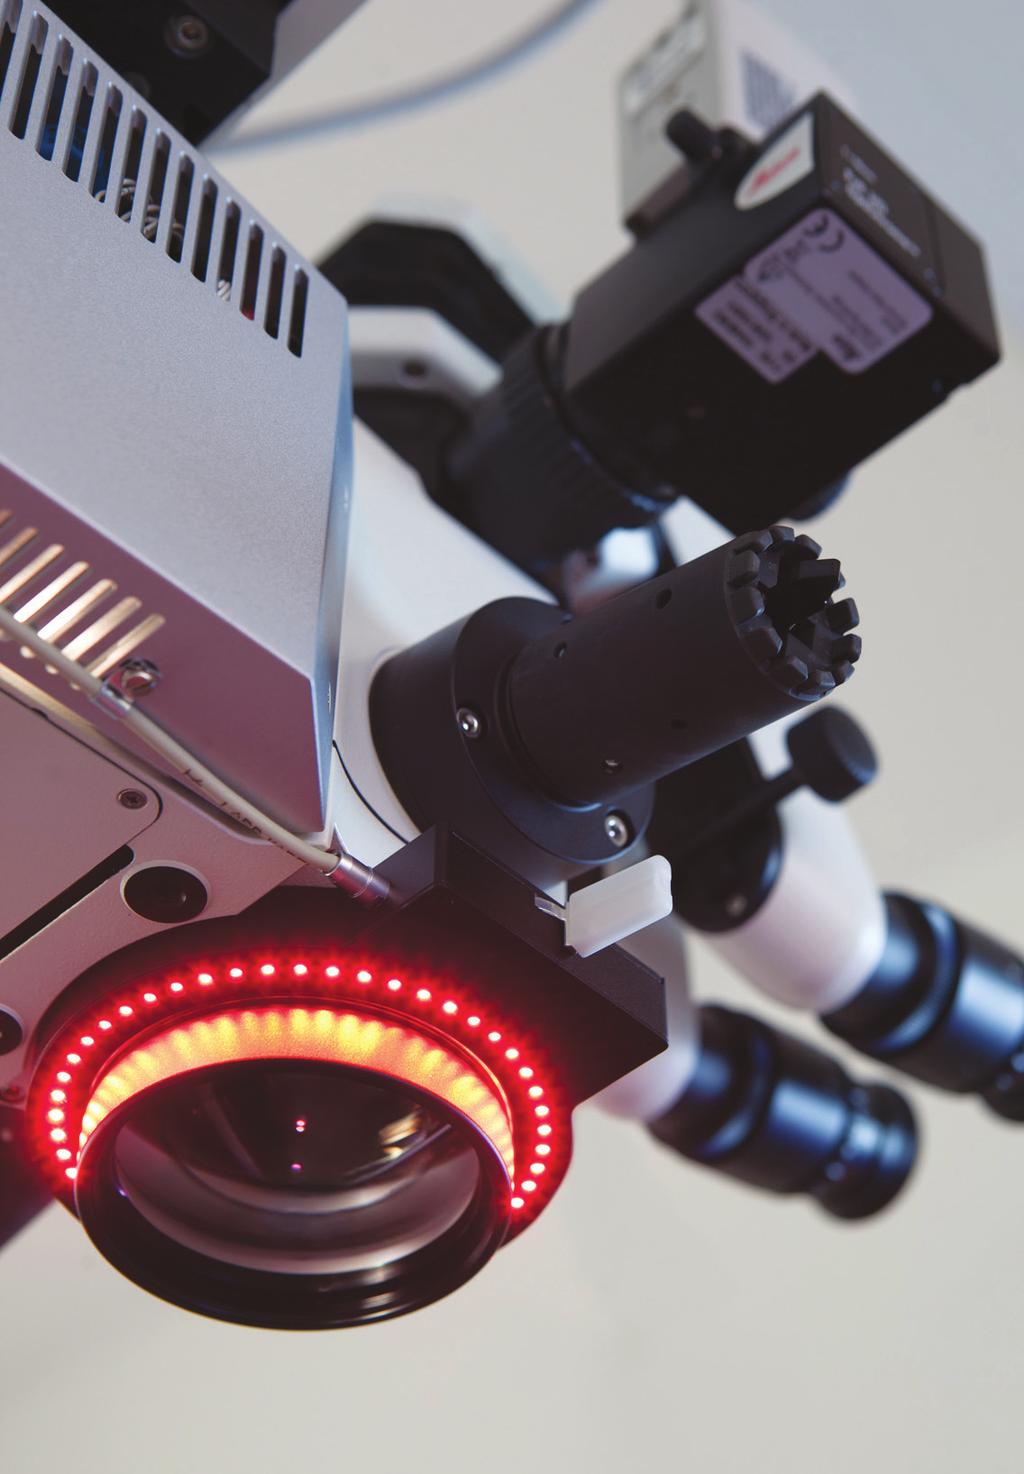 ABOUT LASER CATARACT CENTRE (LCC): Laser Cataract Centre is a state of the art facility in Lindsay, ON, providing patients with the latest surgical technology for optimal results.